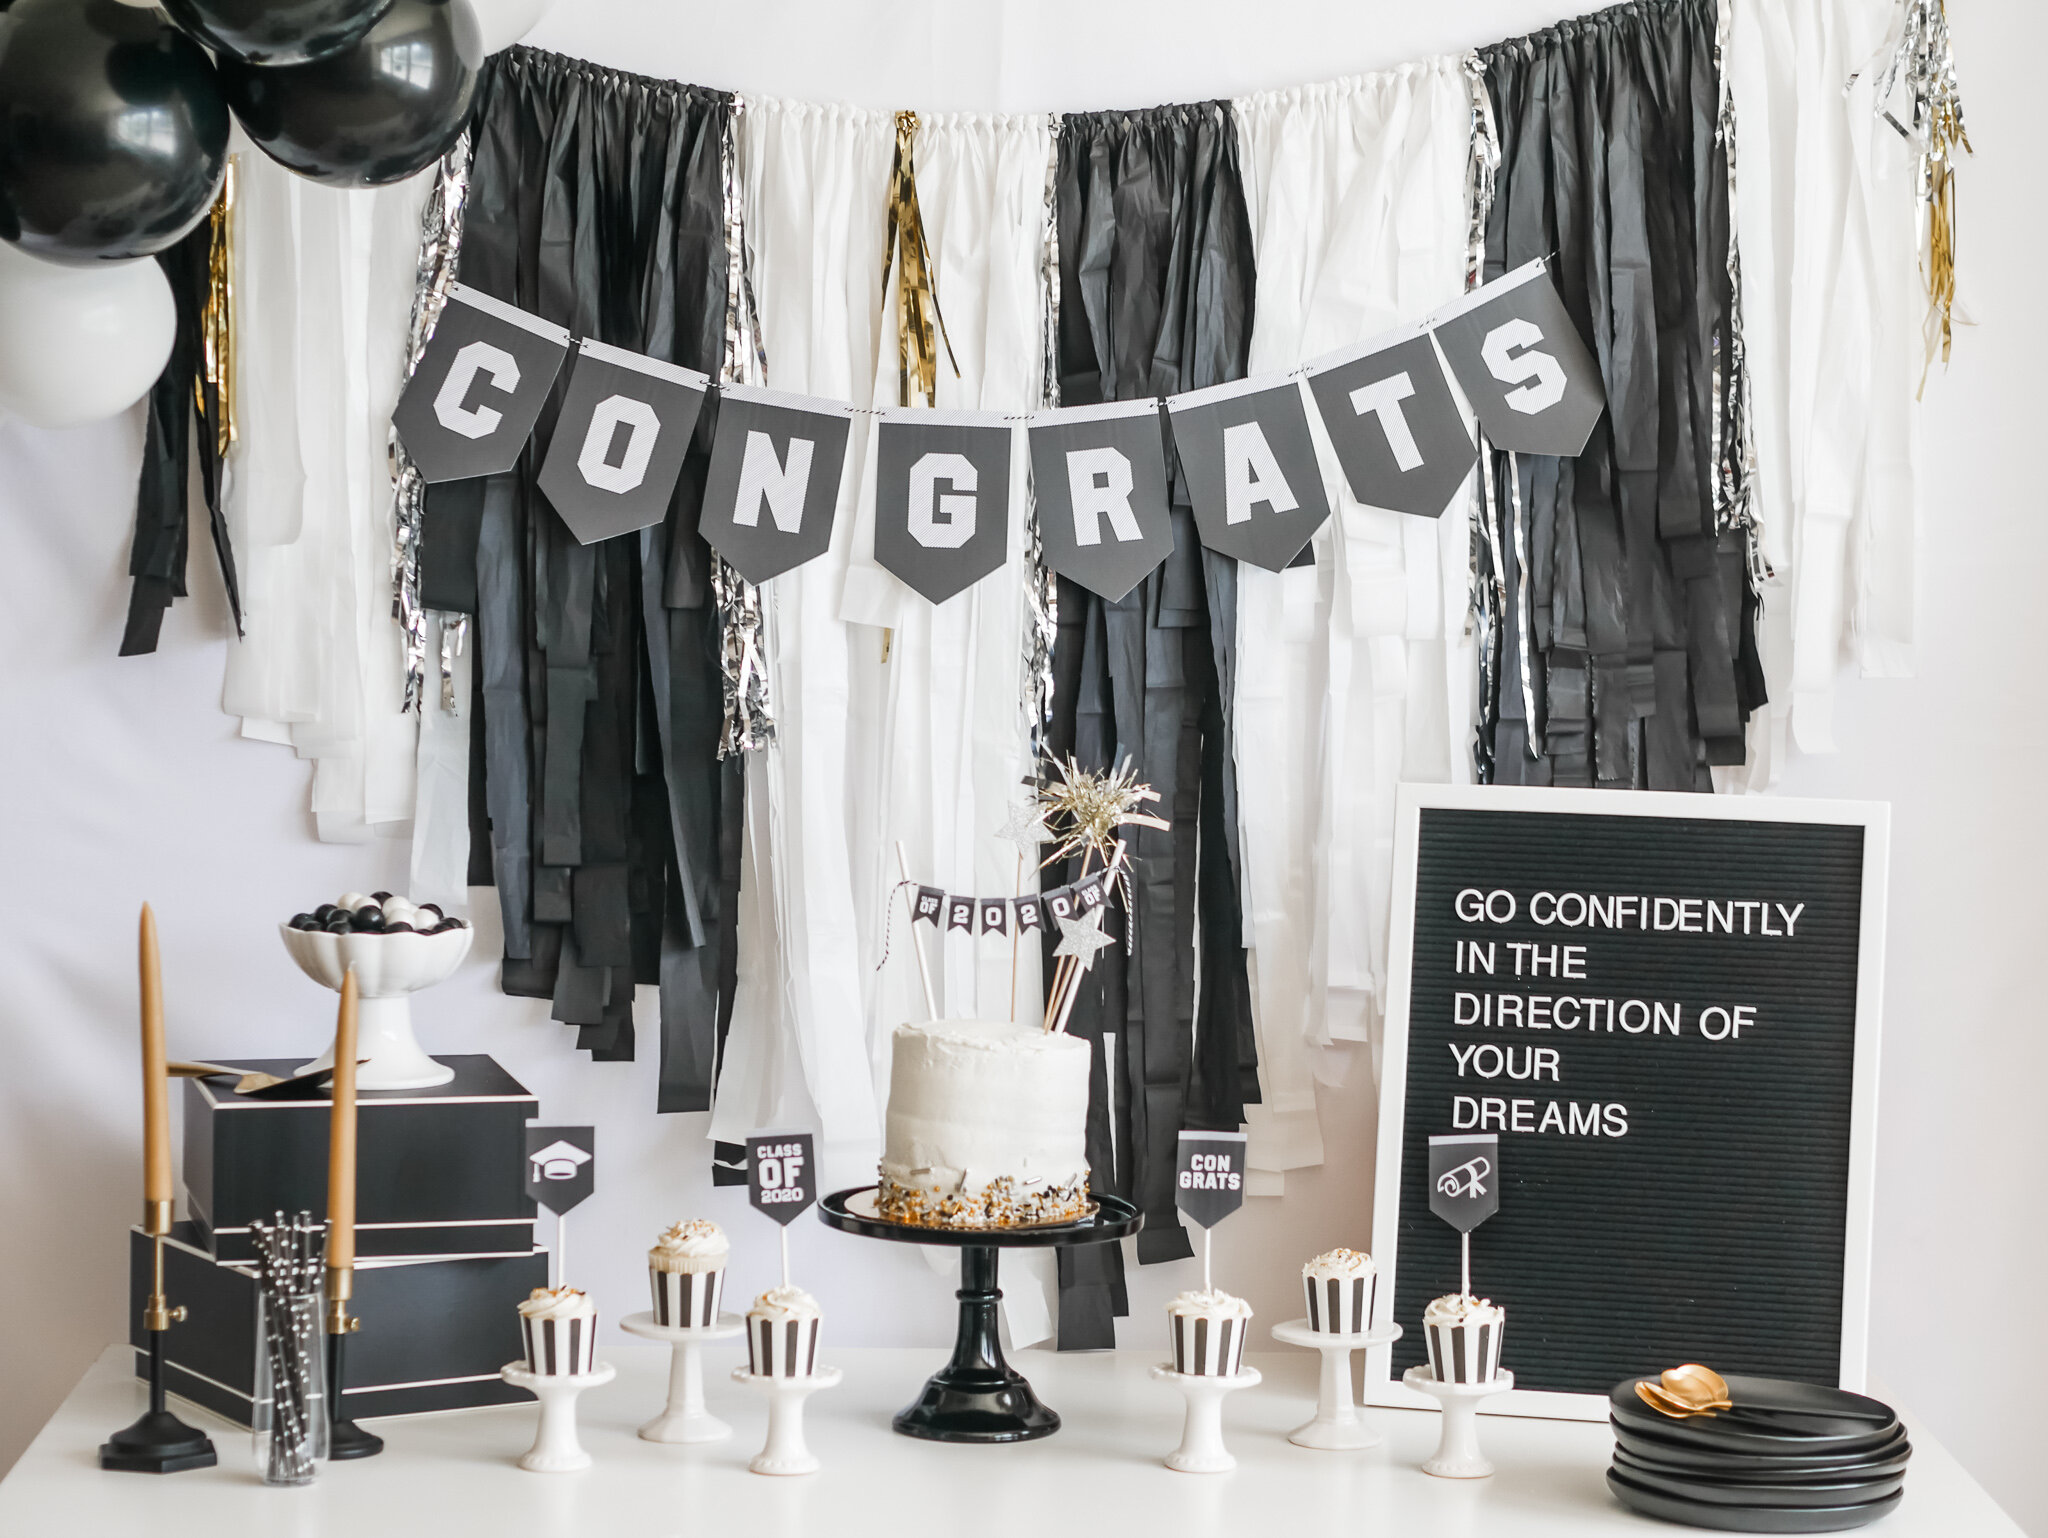 How to Decorate a Graduation Party at Home